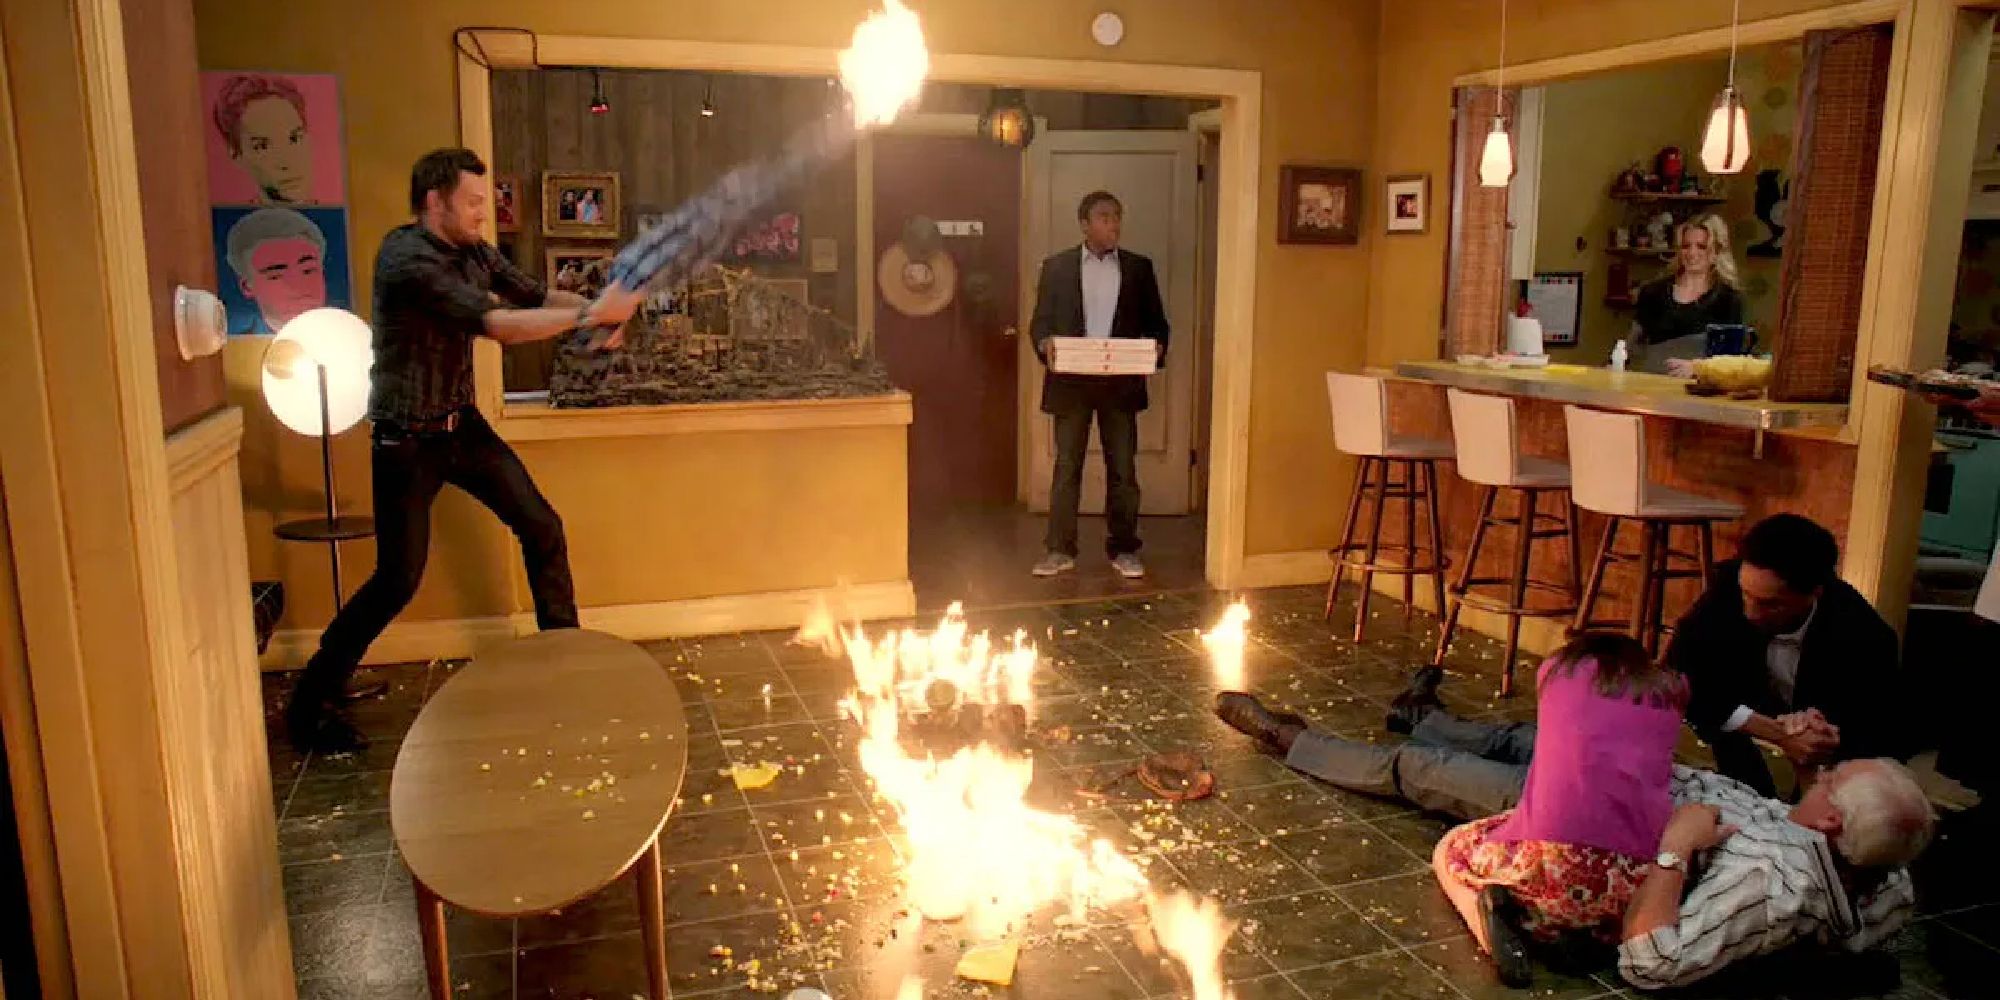 Jeff swinging a flaming blanket, Troy with pizza, Britta throwing water, and Annie and Abed treating an injured Pierce